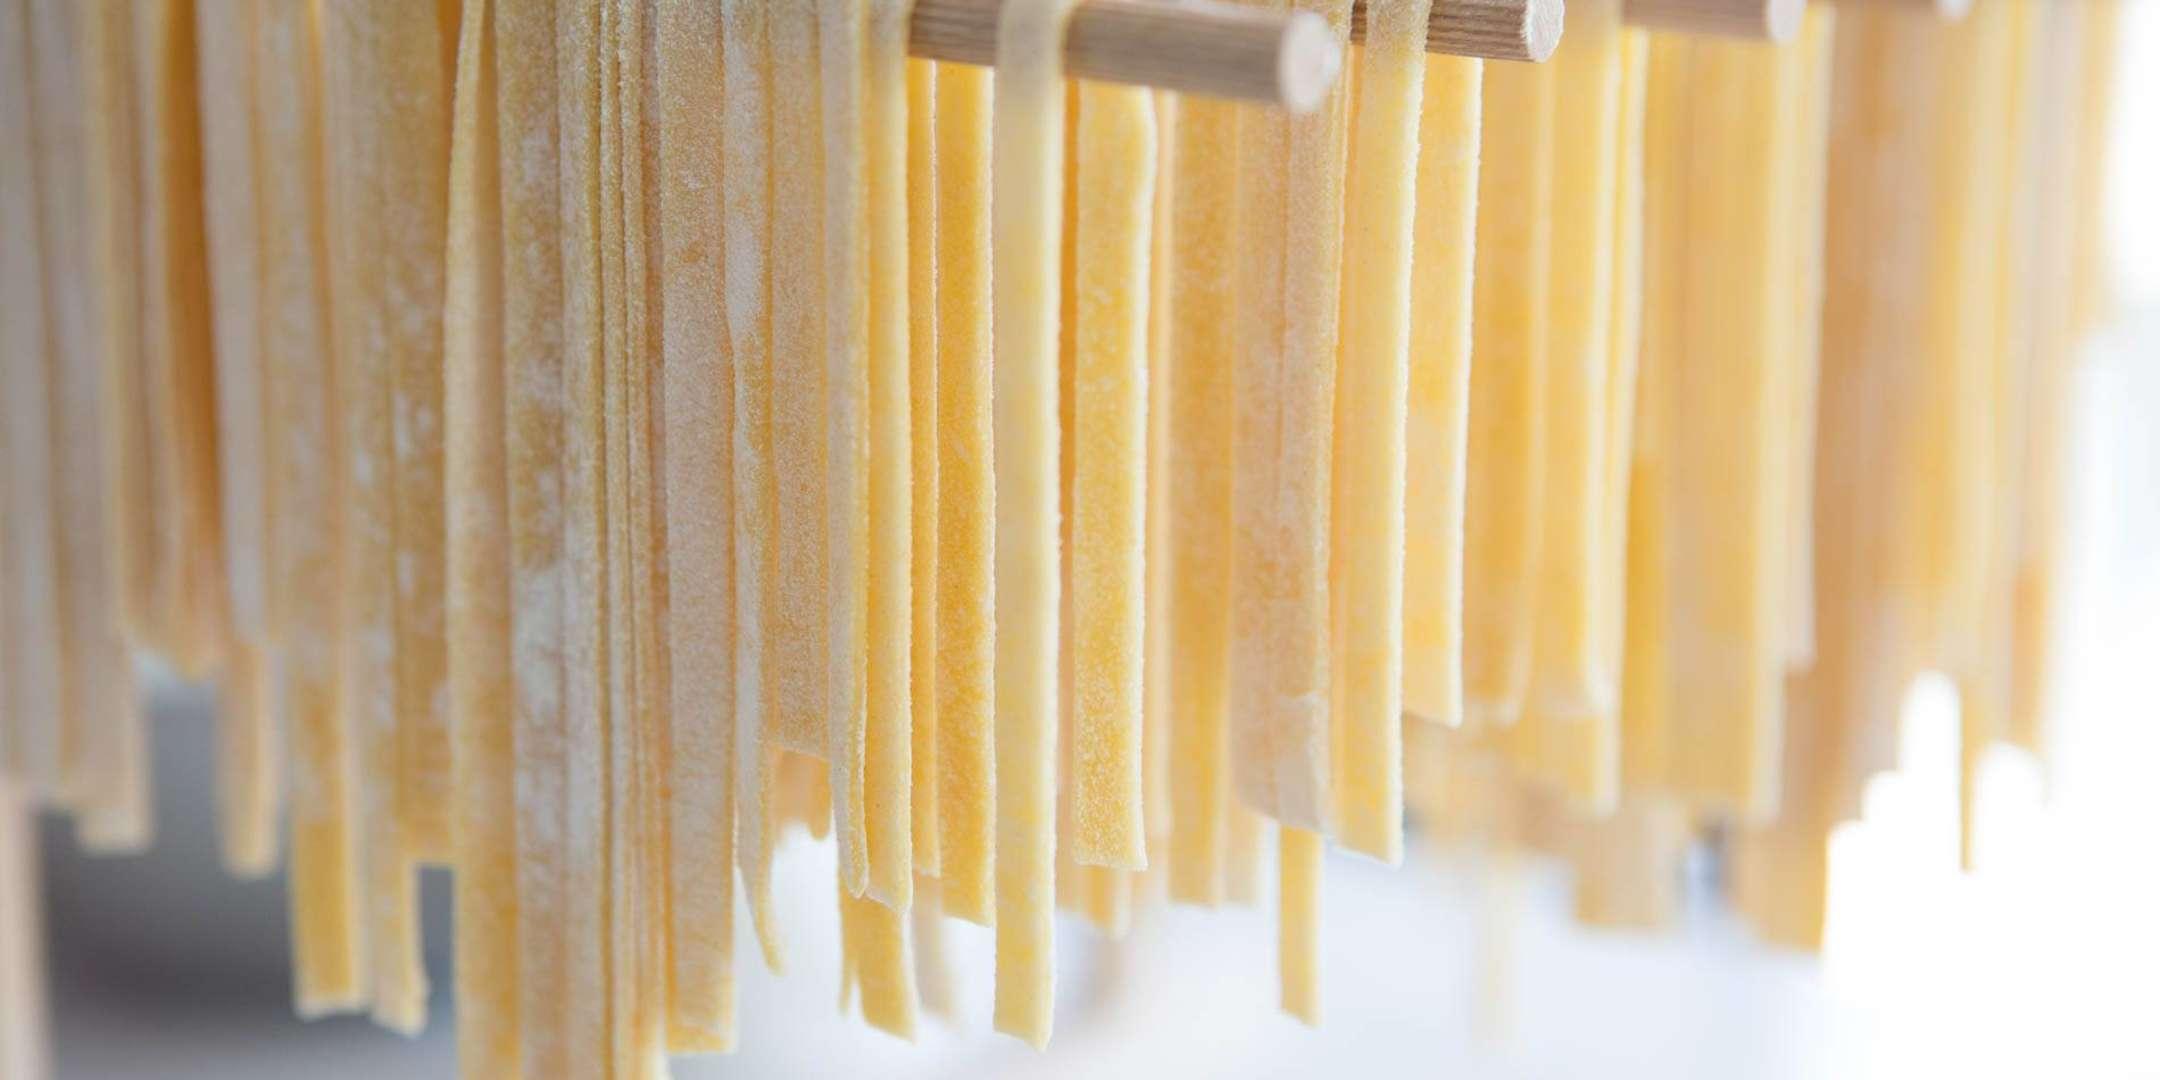 Italian Pasta From Scratch - Team Building by Cozymeal™